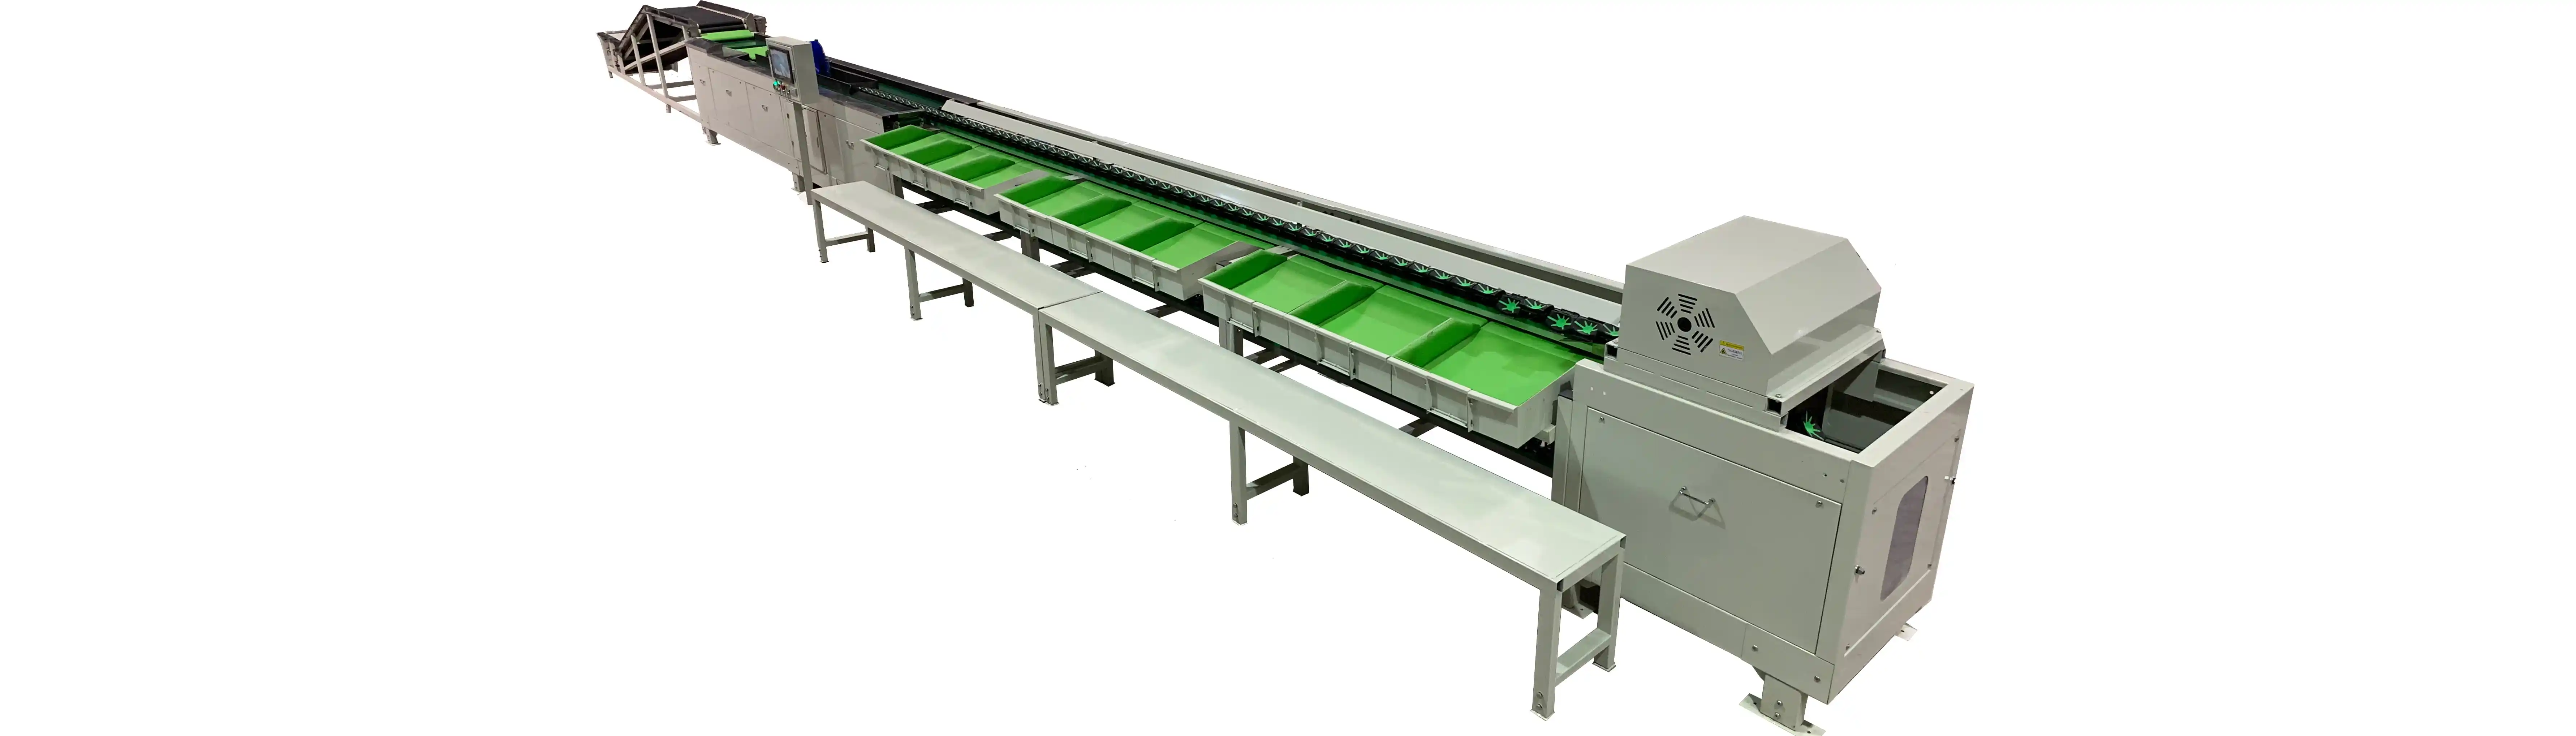 Fruit&Vegetable Rolling Sizing Machine for Sorting Sour Cherry Apricot  Jujube - China Pomelo Sorting Machine, Mandarin Sorting Machine